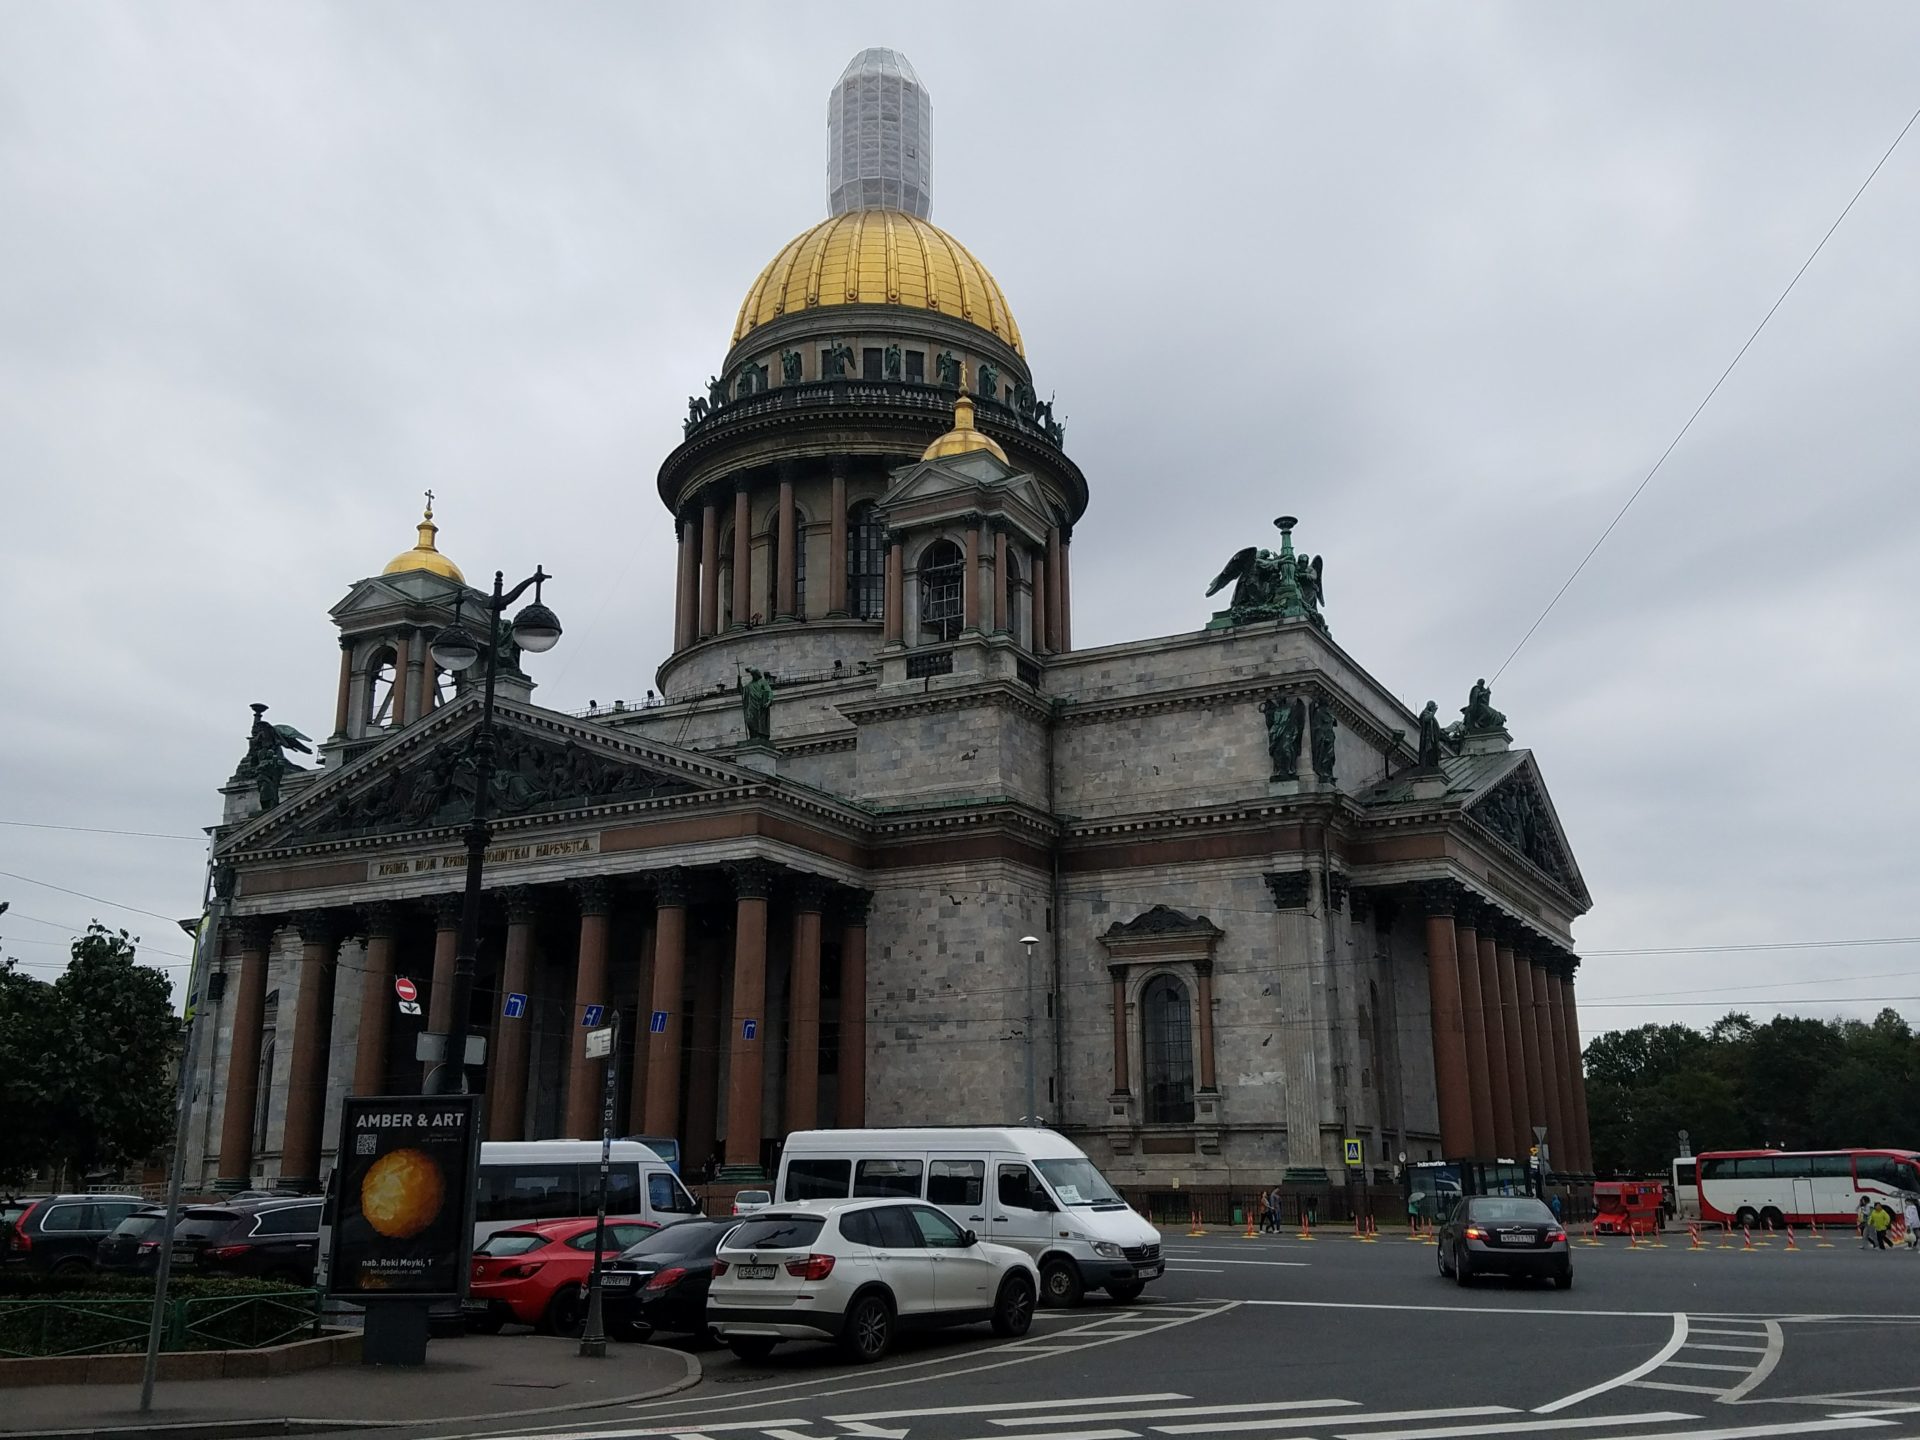 Saint Isaac's Cathedral with a dome on top and cars parked in front of it